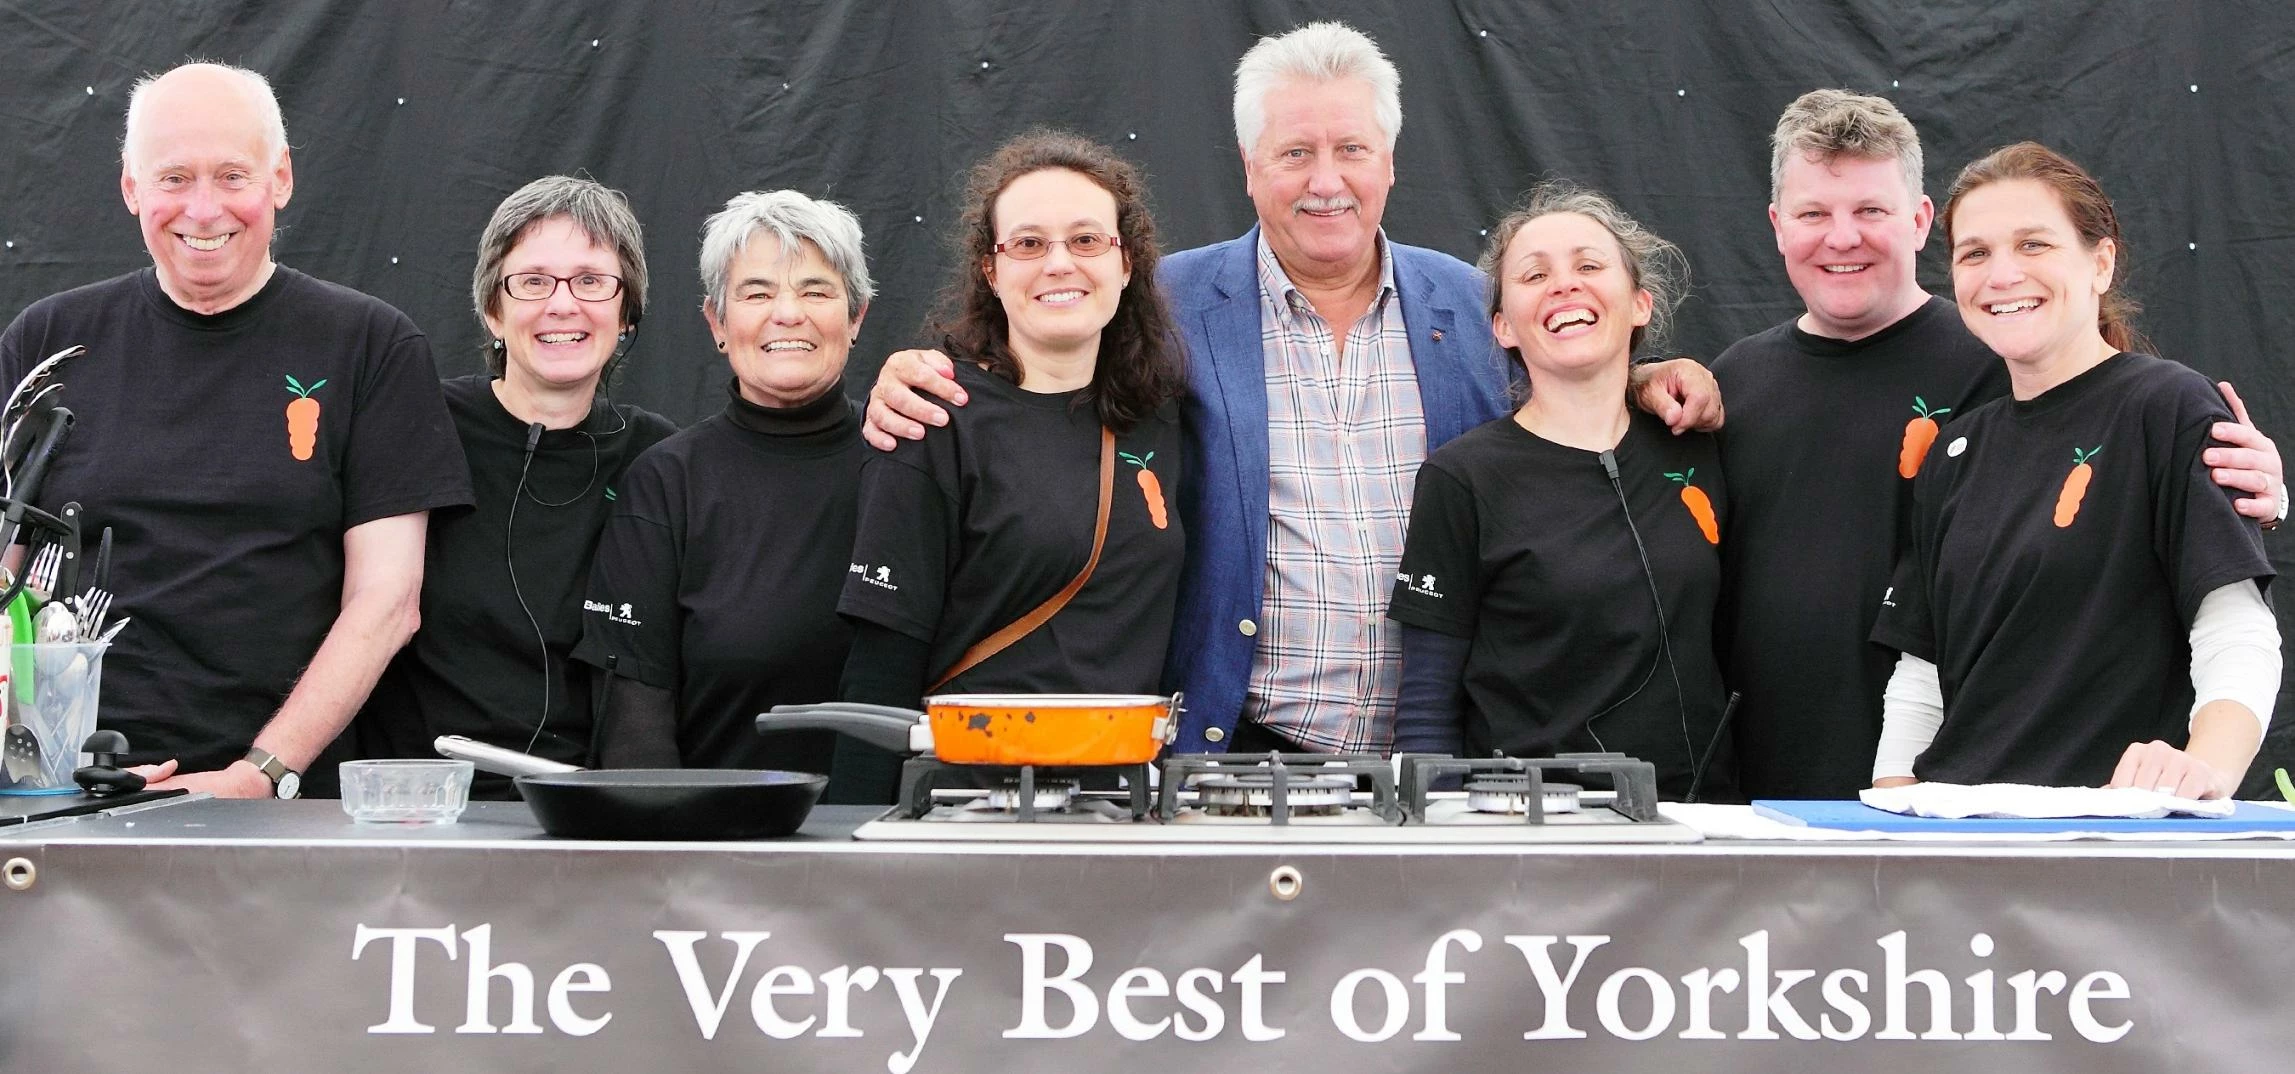 Homegrown Food Festival team with Brian Turner